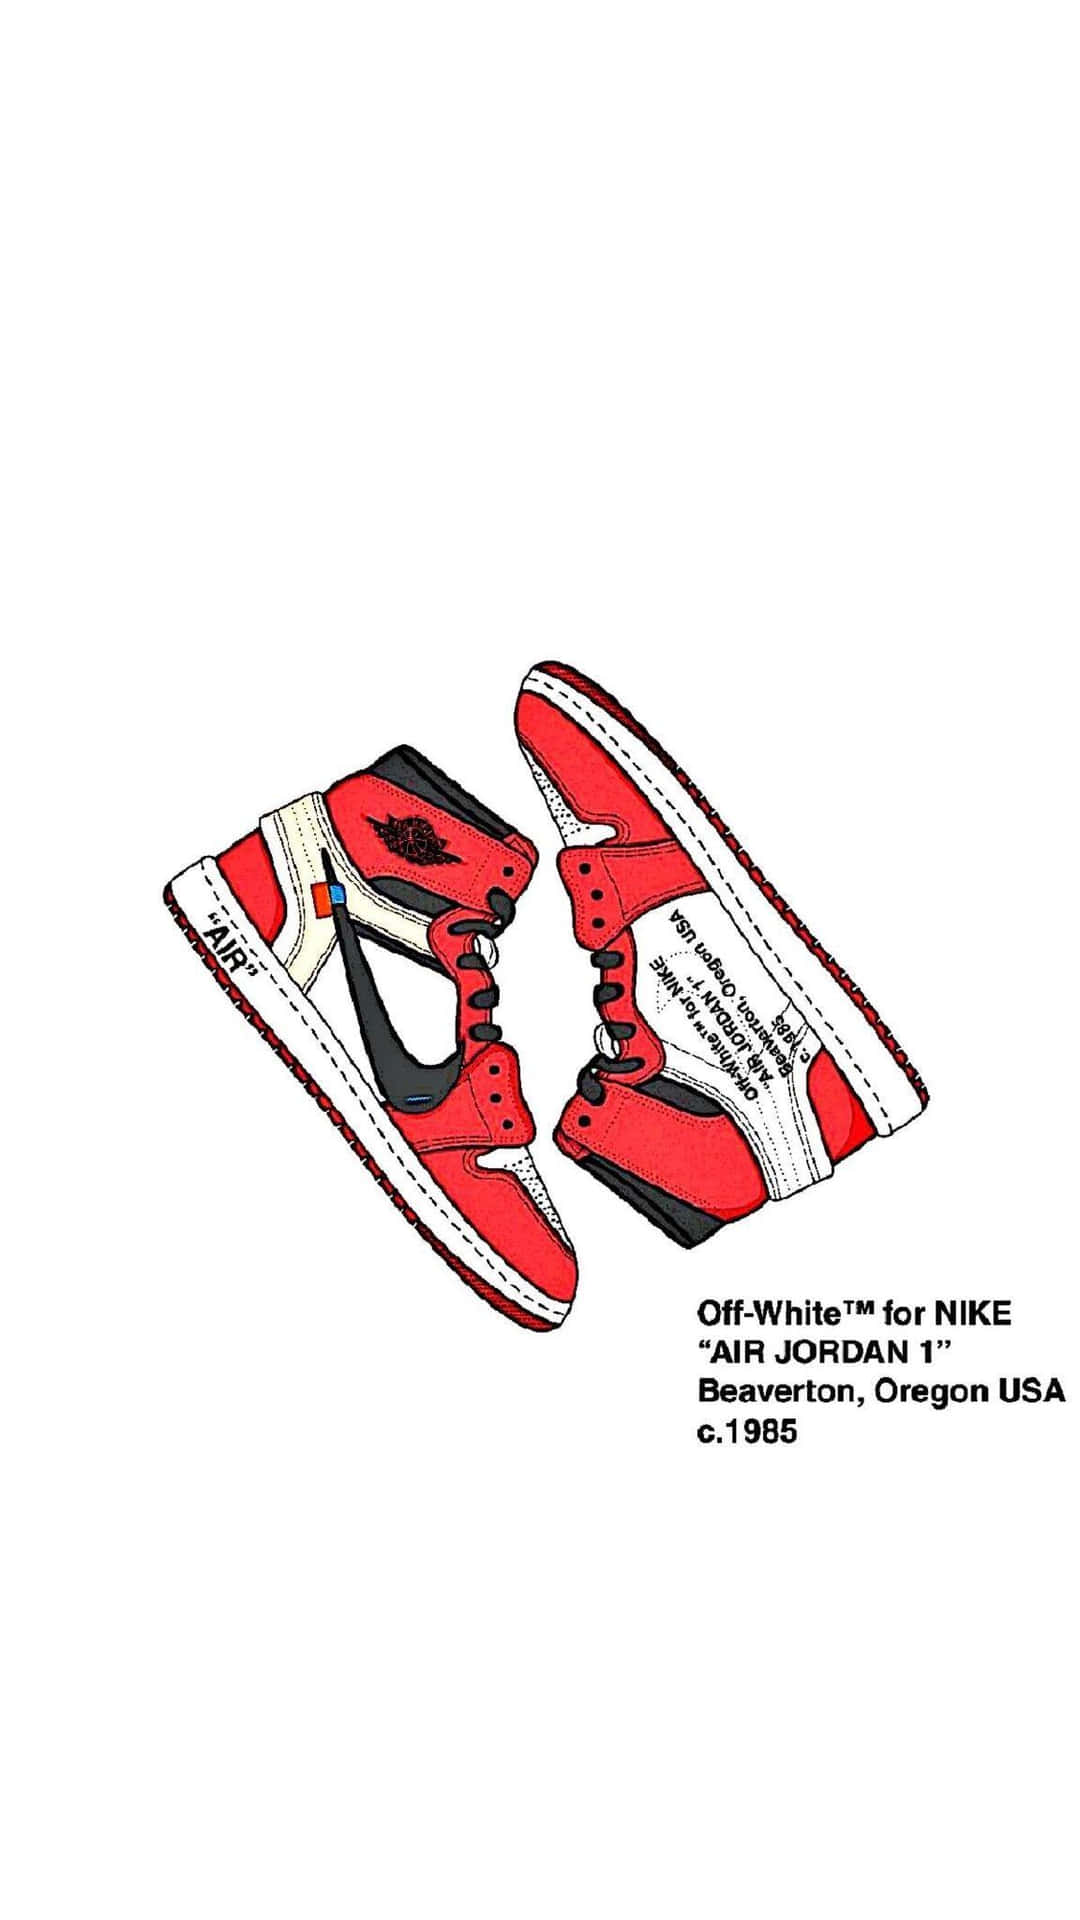 Download A Pair Of Air Jordan 1 Sneakers With A Red And White Design ...